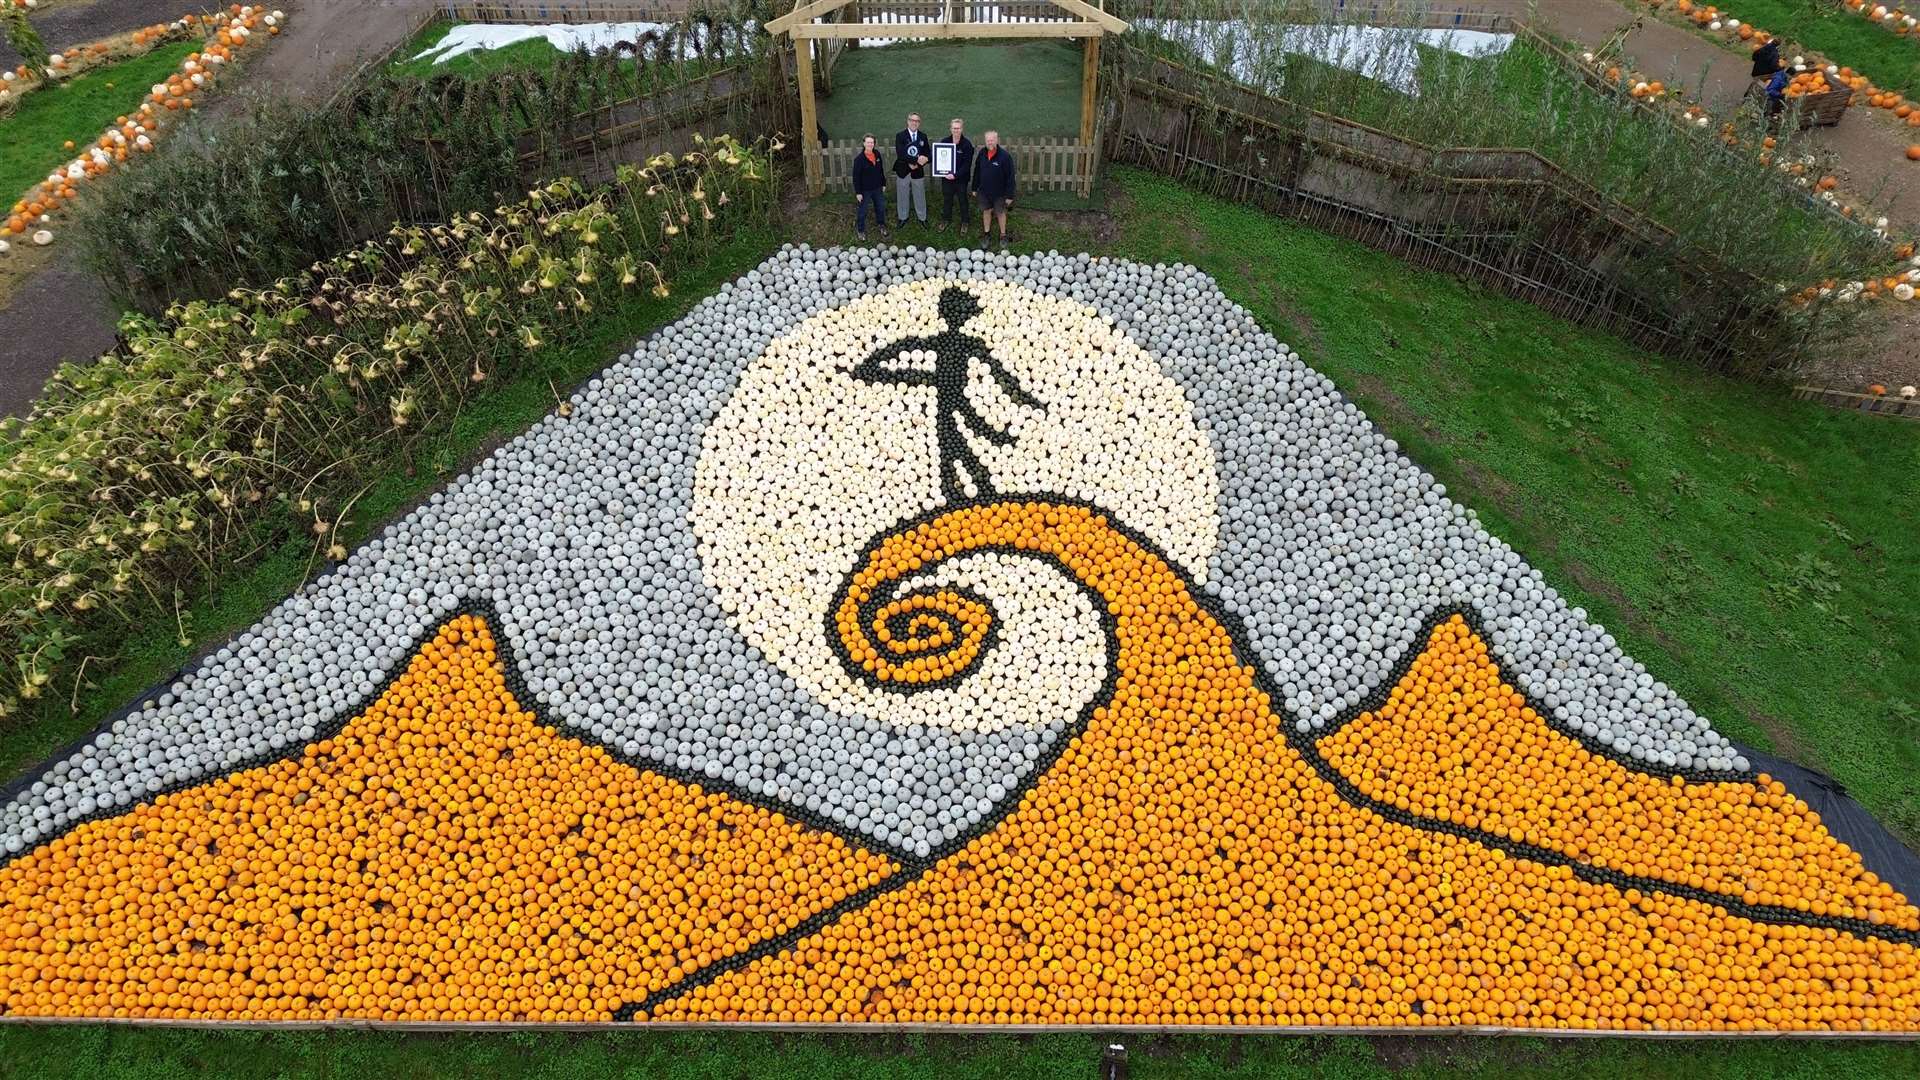 The mosaic is made up of different pumpkin and squash varieties (Guinness World Records/PA)